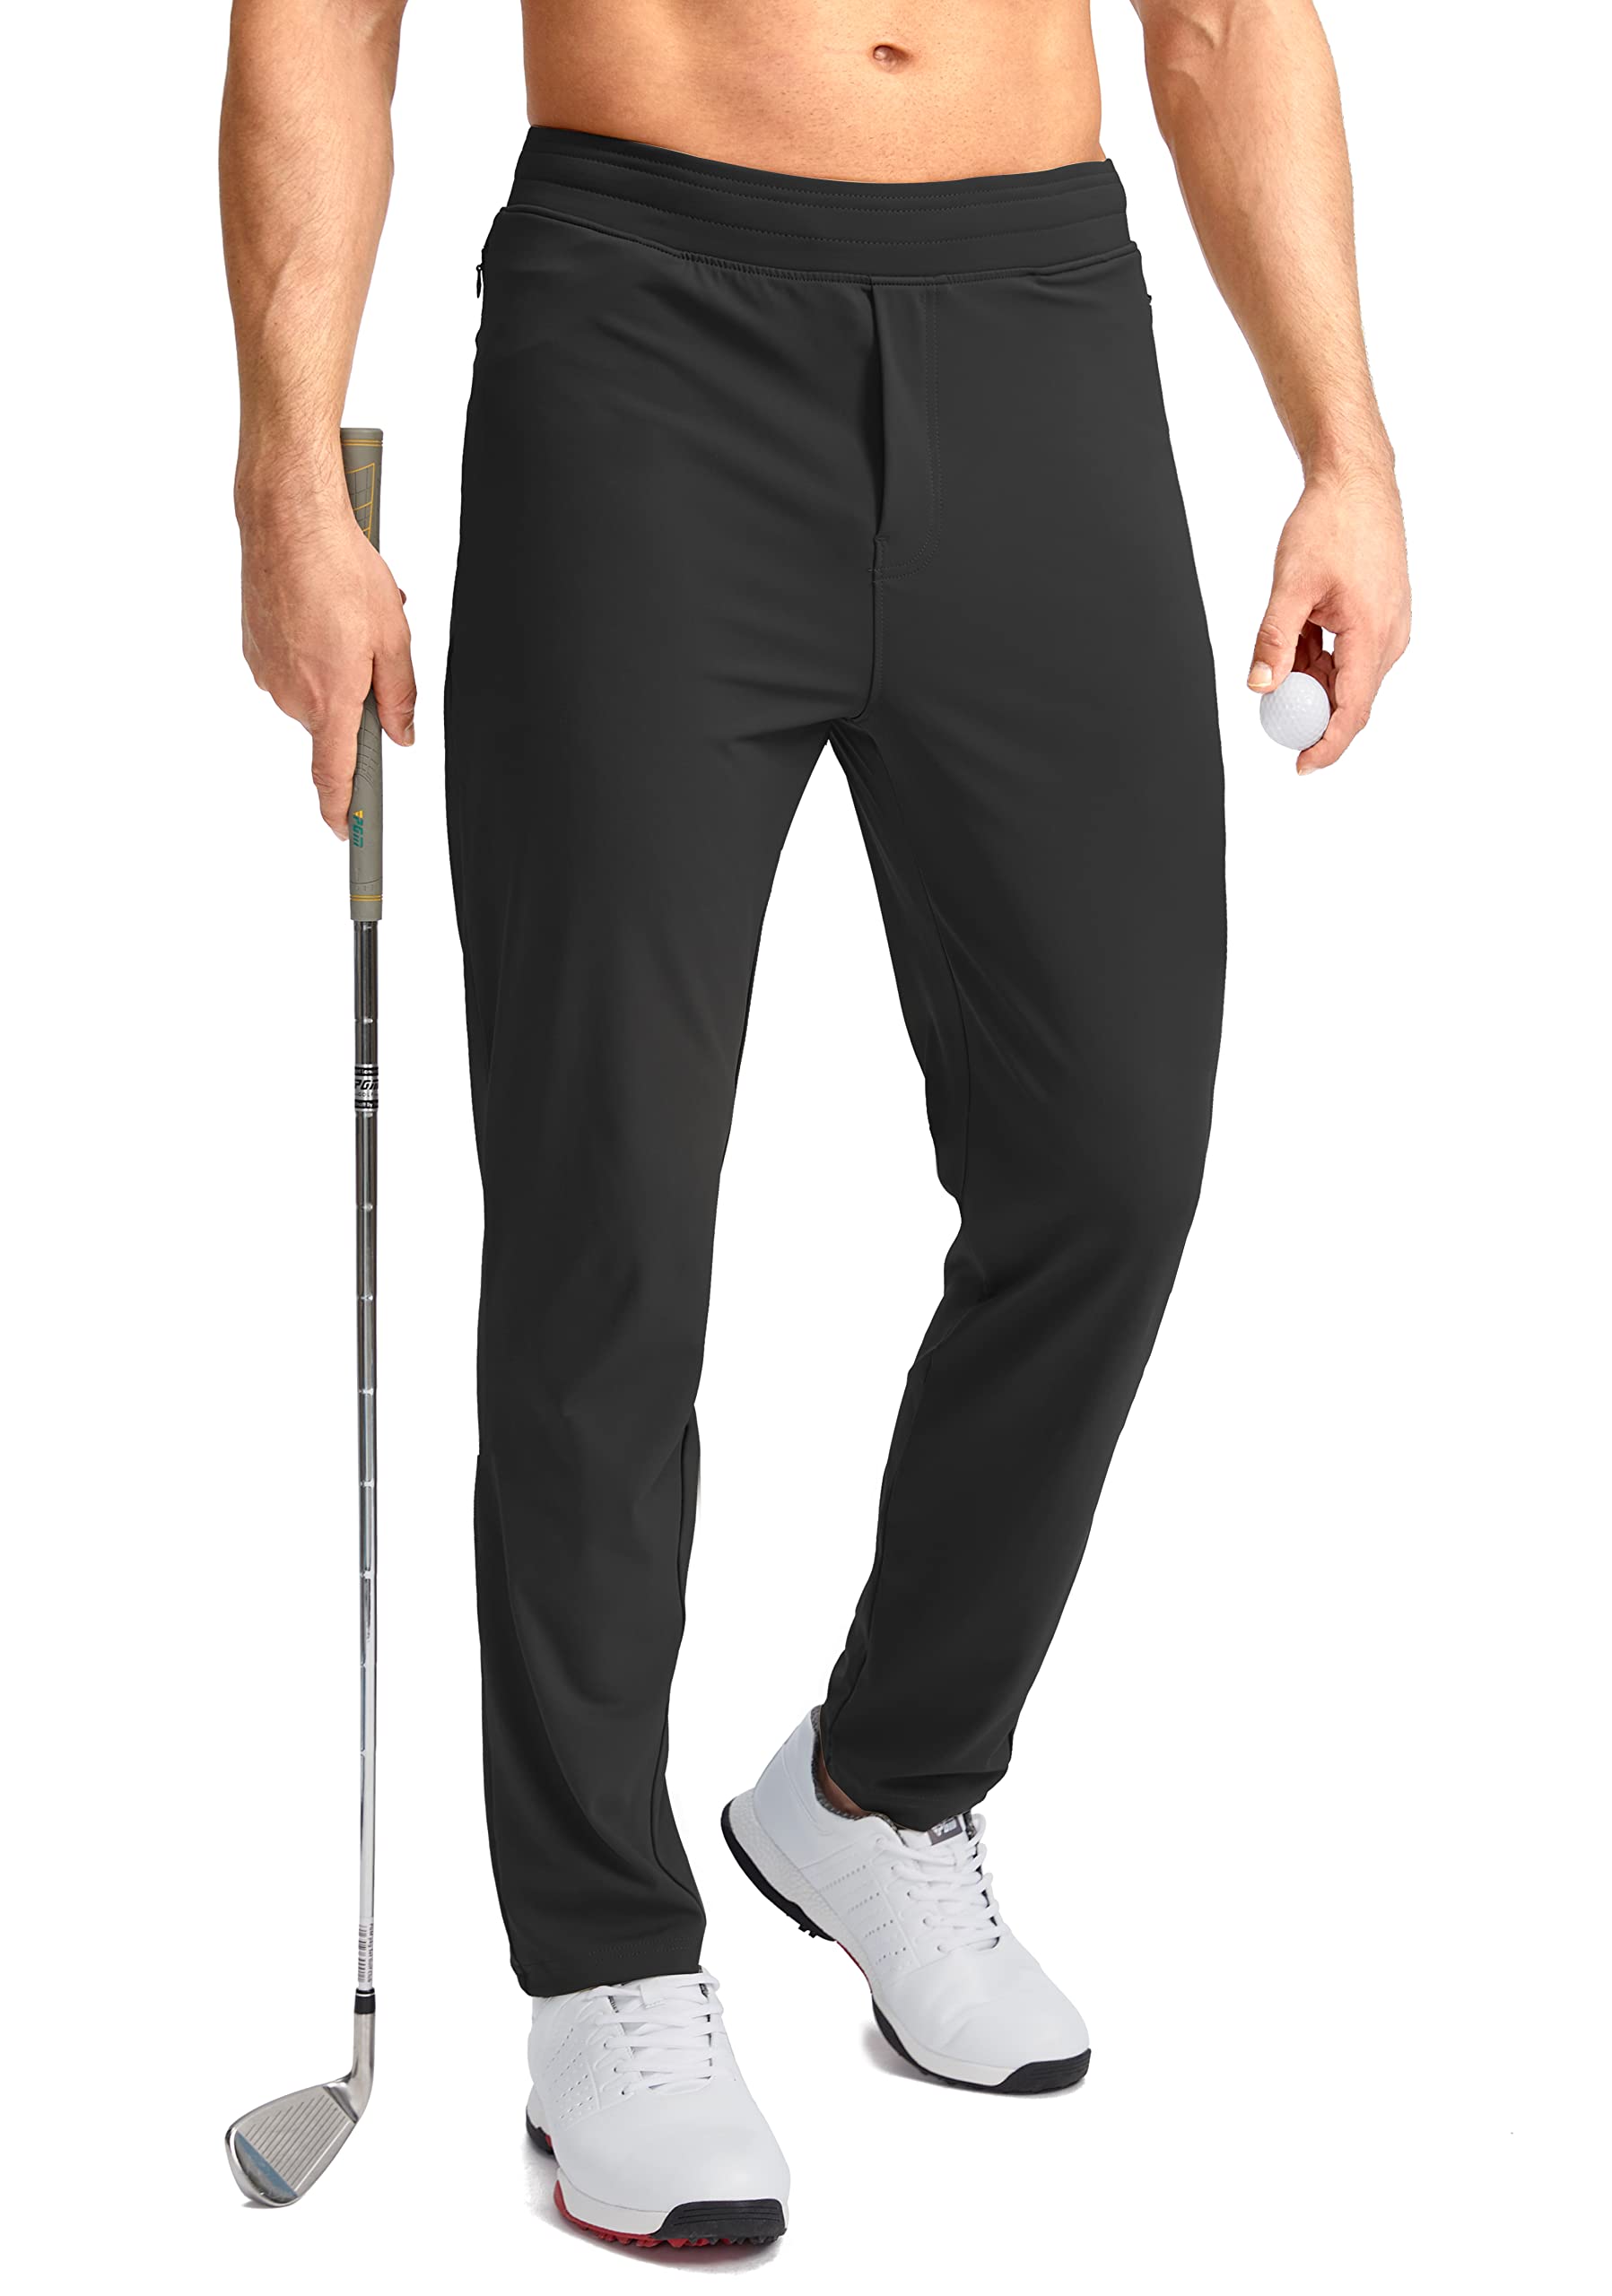  Pudolla Men's Golf Pants Stretch Sweatpants with